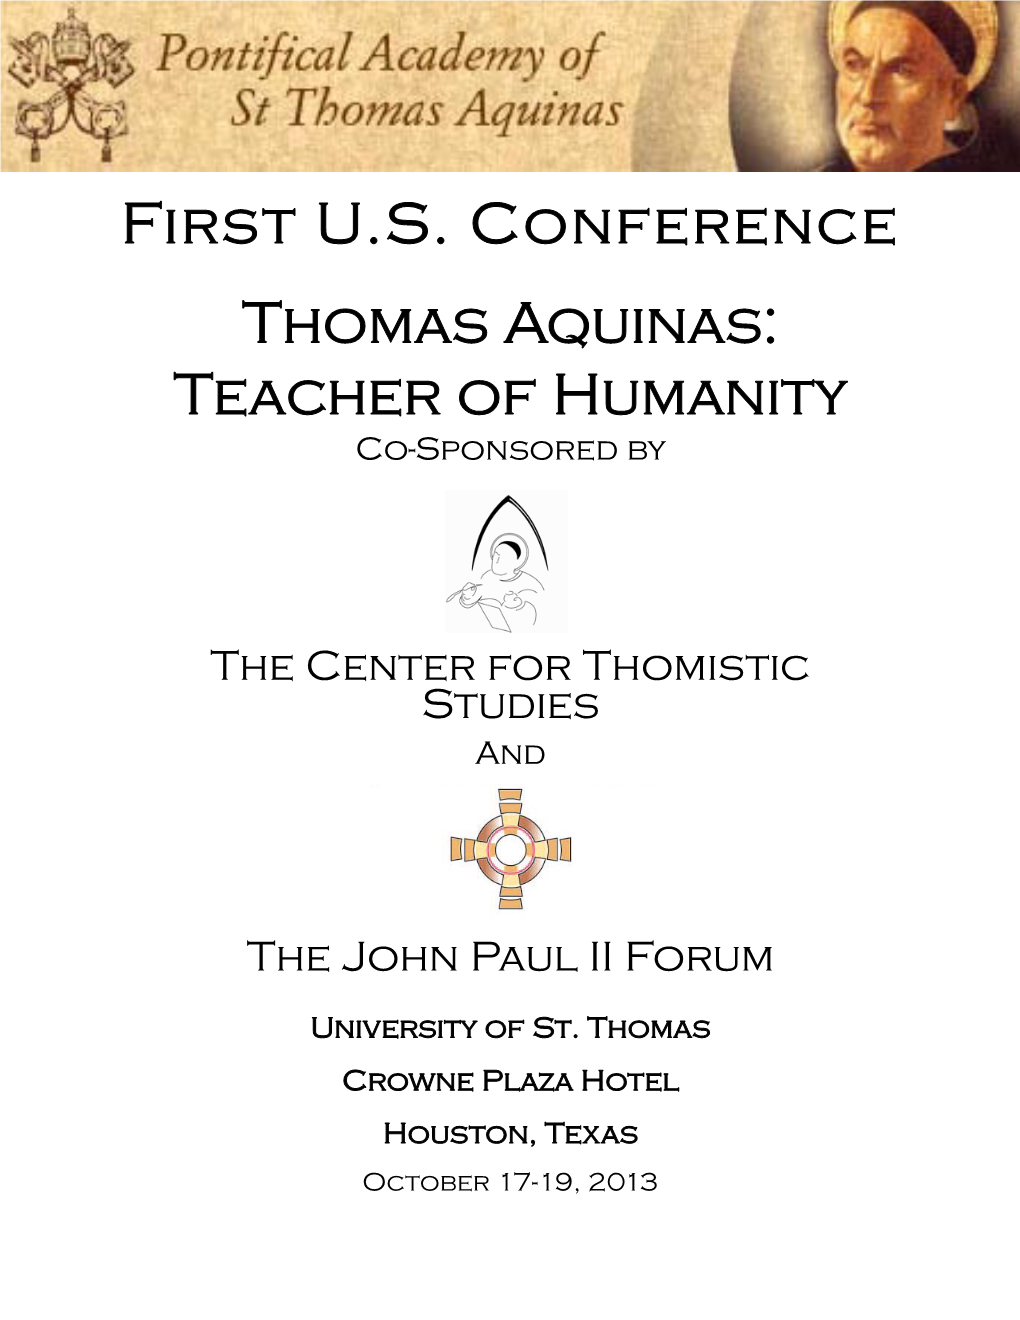 First U.S. Conference Thomas Aquinas: Teacher of Humanity